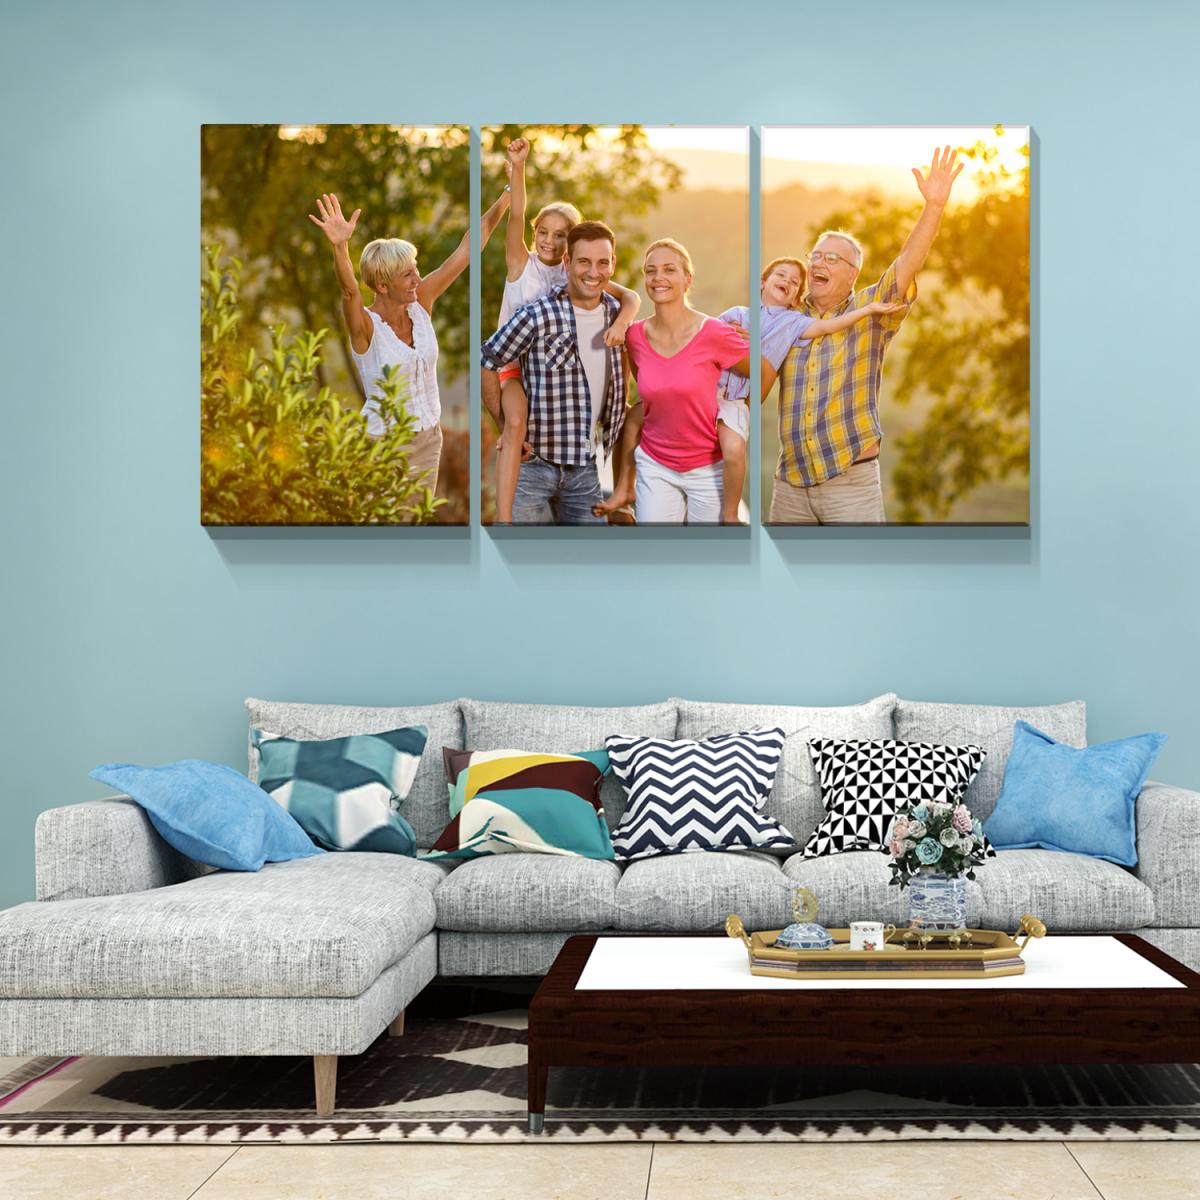 3 Panels Customize Canvas Prints with Your Photo Canvas Wall Art- Personalized Canvas Picture, Customized To Any Style,Gifts for Family, Wedding, Friends, Home Decoration,Pet/Animal